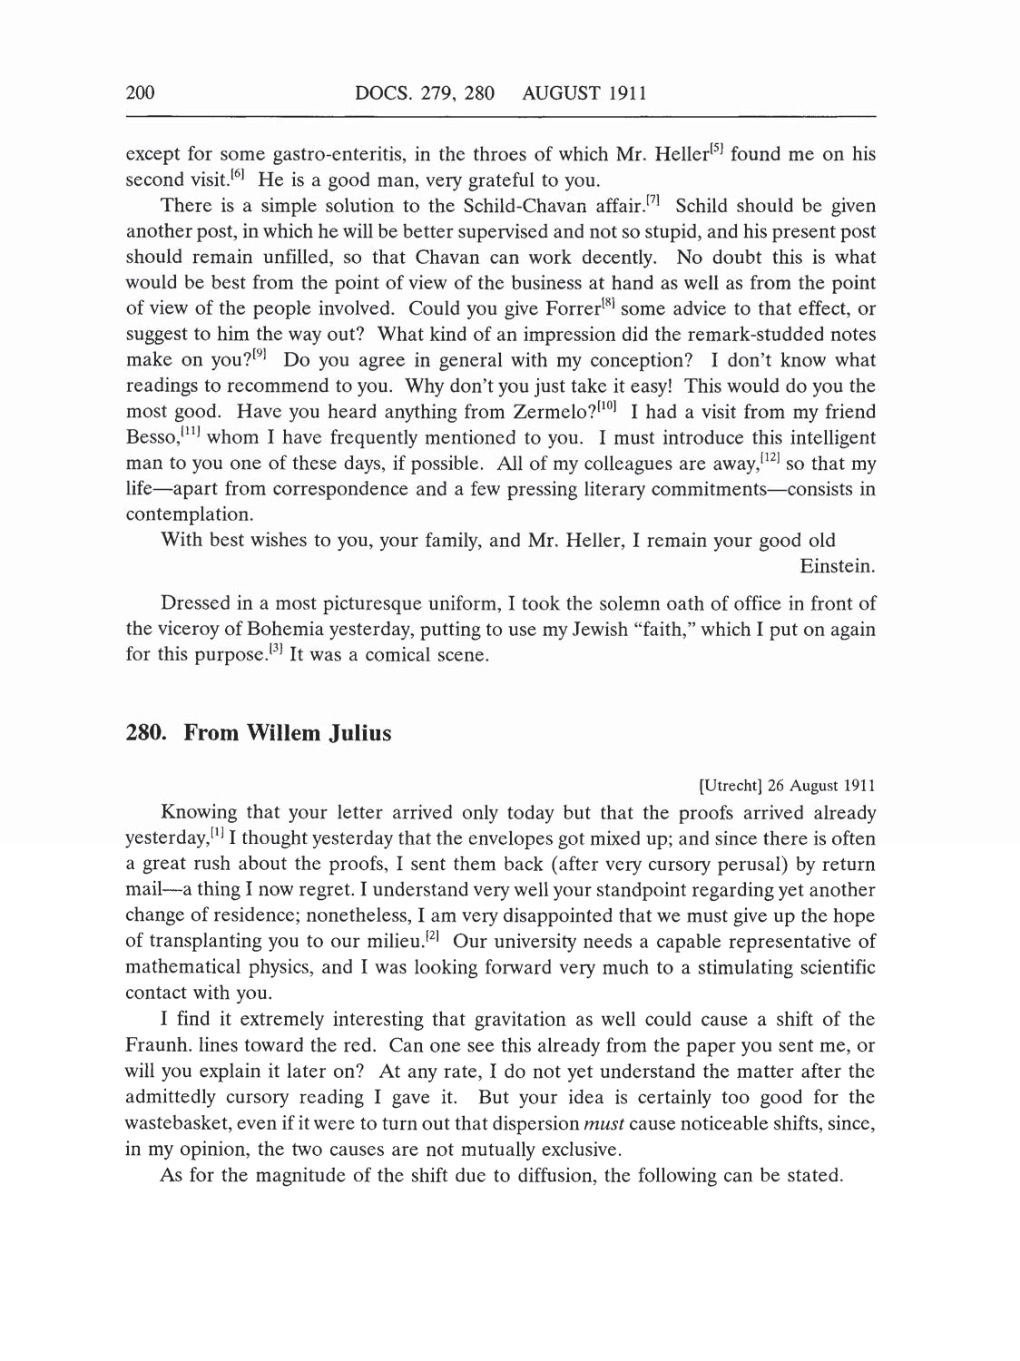 Volume 5: The Swiss Years: Correspondence, 1902-1914 (English translation supplement) page 200